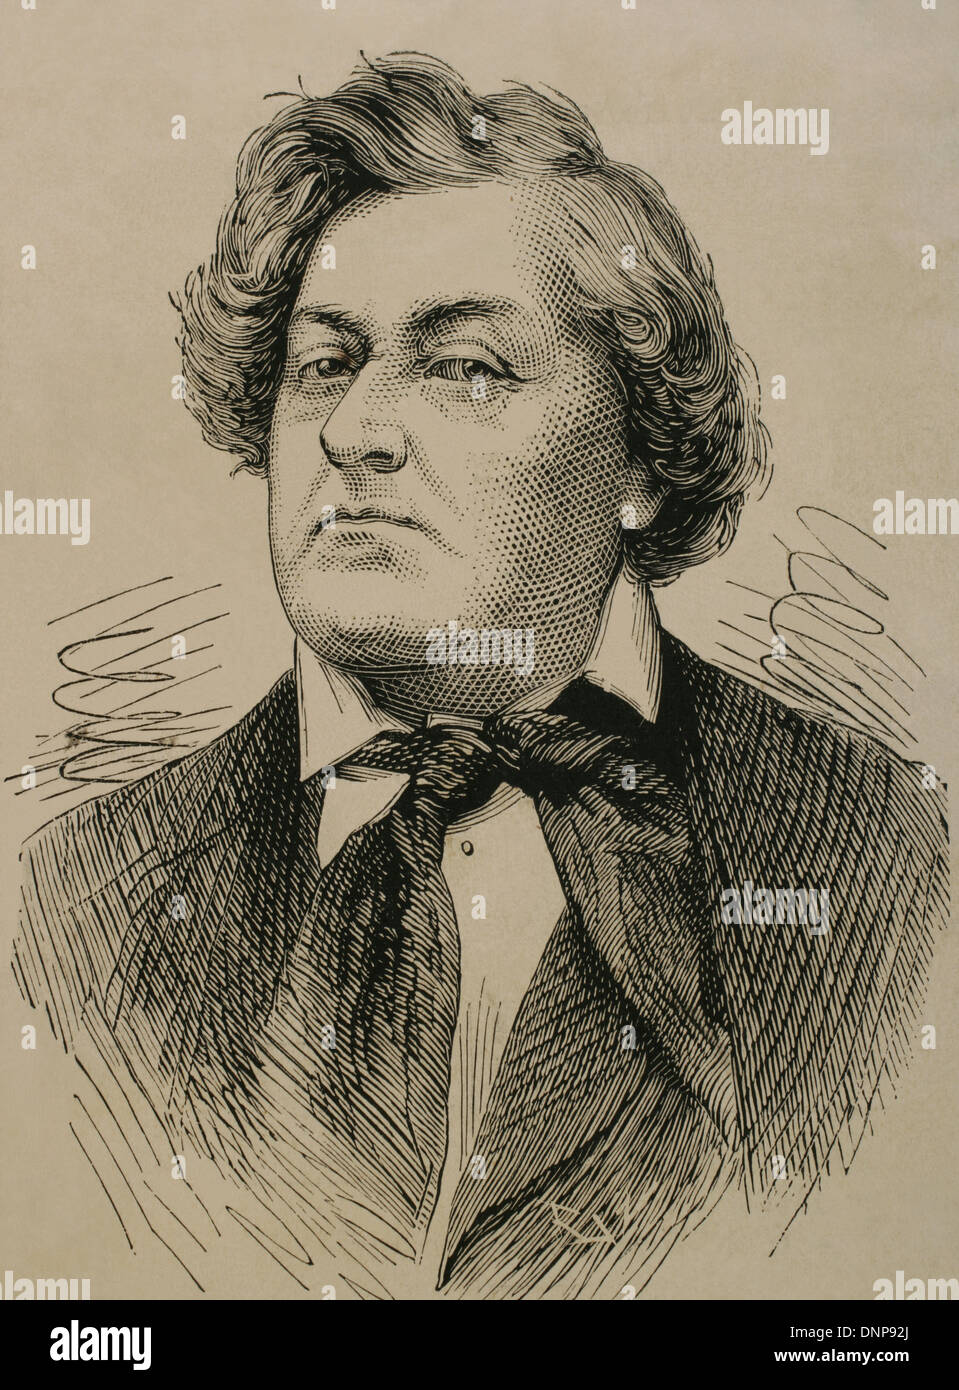 Frederick Lemaitre (1800-1876). French actor. Engraving in The Spanish and American Illustration, 1876. Stock Photo